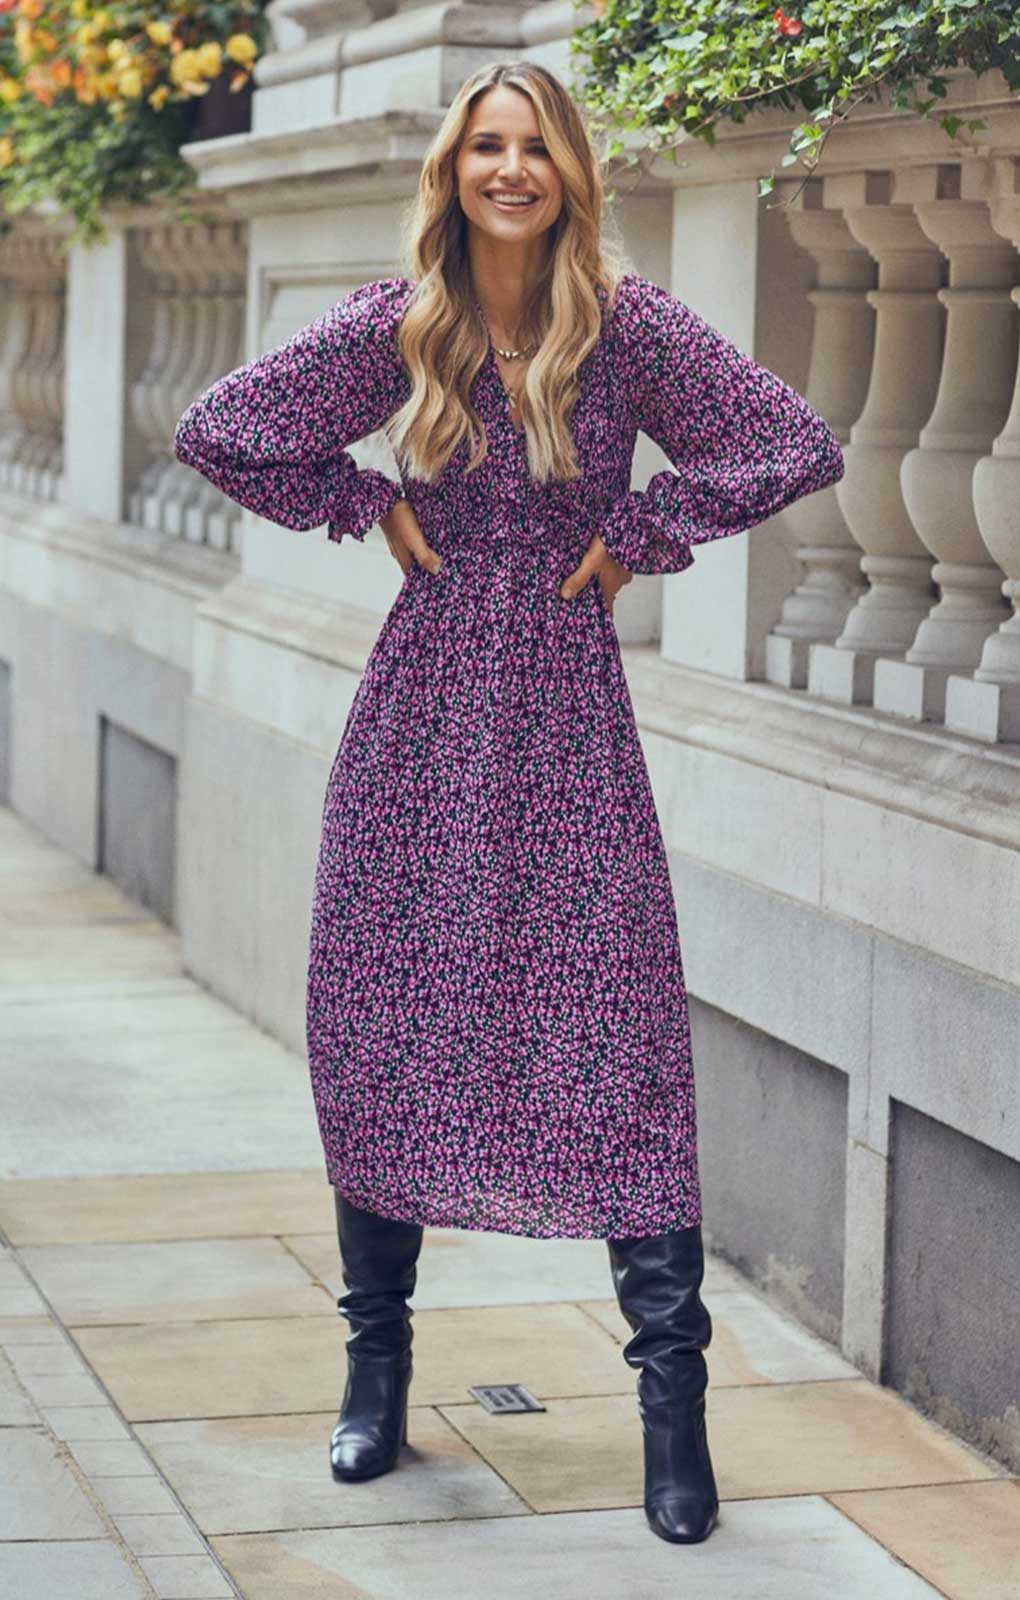 Little Mistress Purple Midaxi Dress by Vogue Williams product image